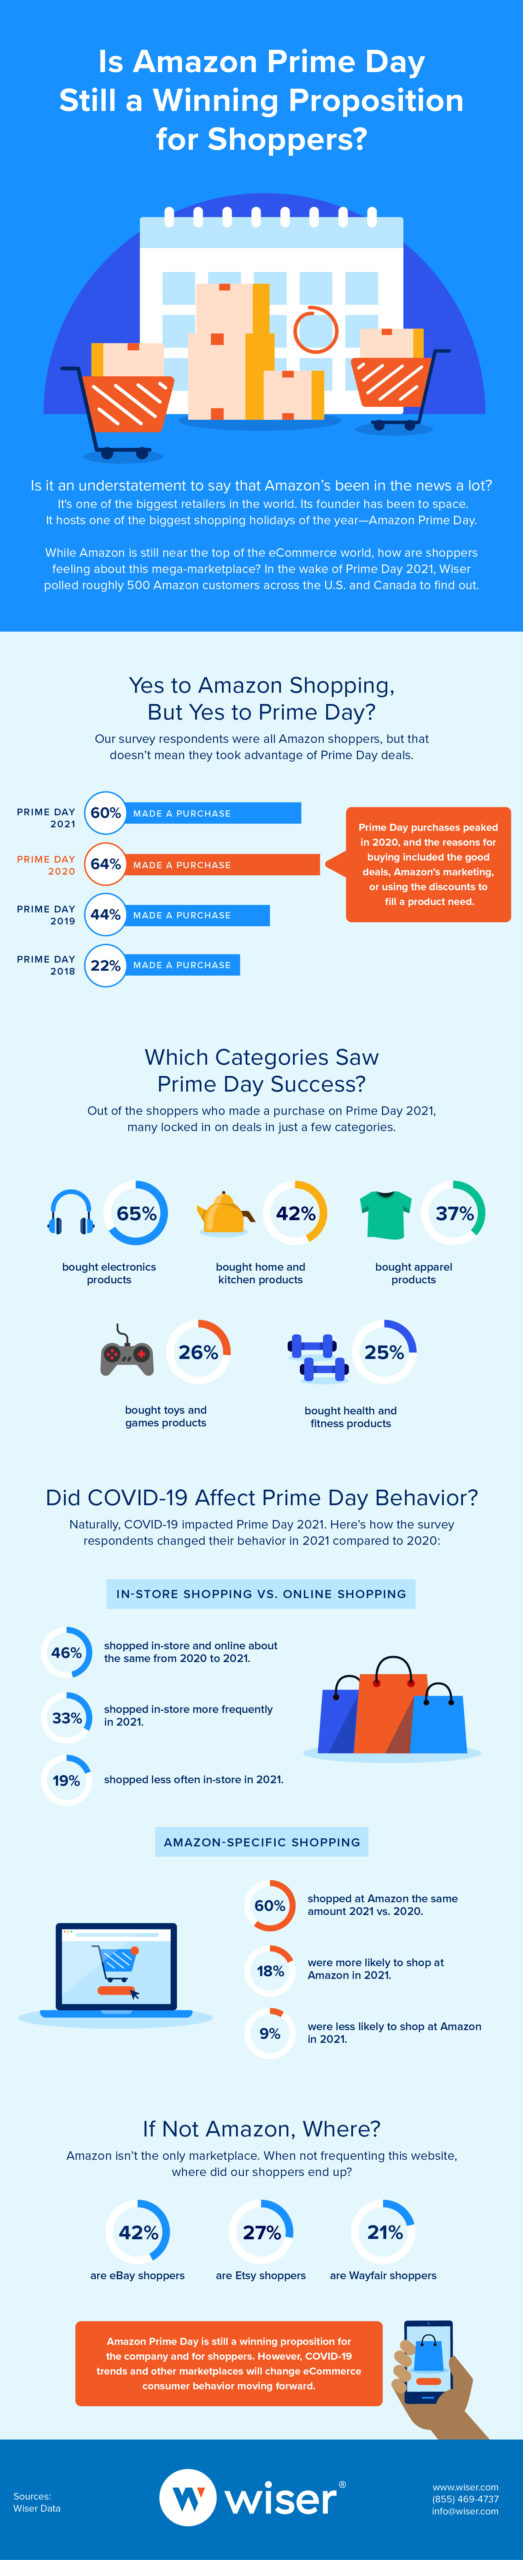 Infographic featuring data points on Amazon Prime Day 2021.